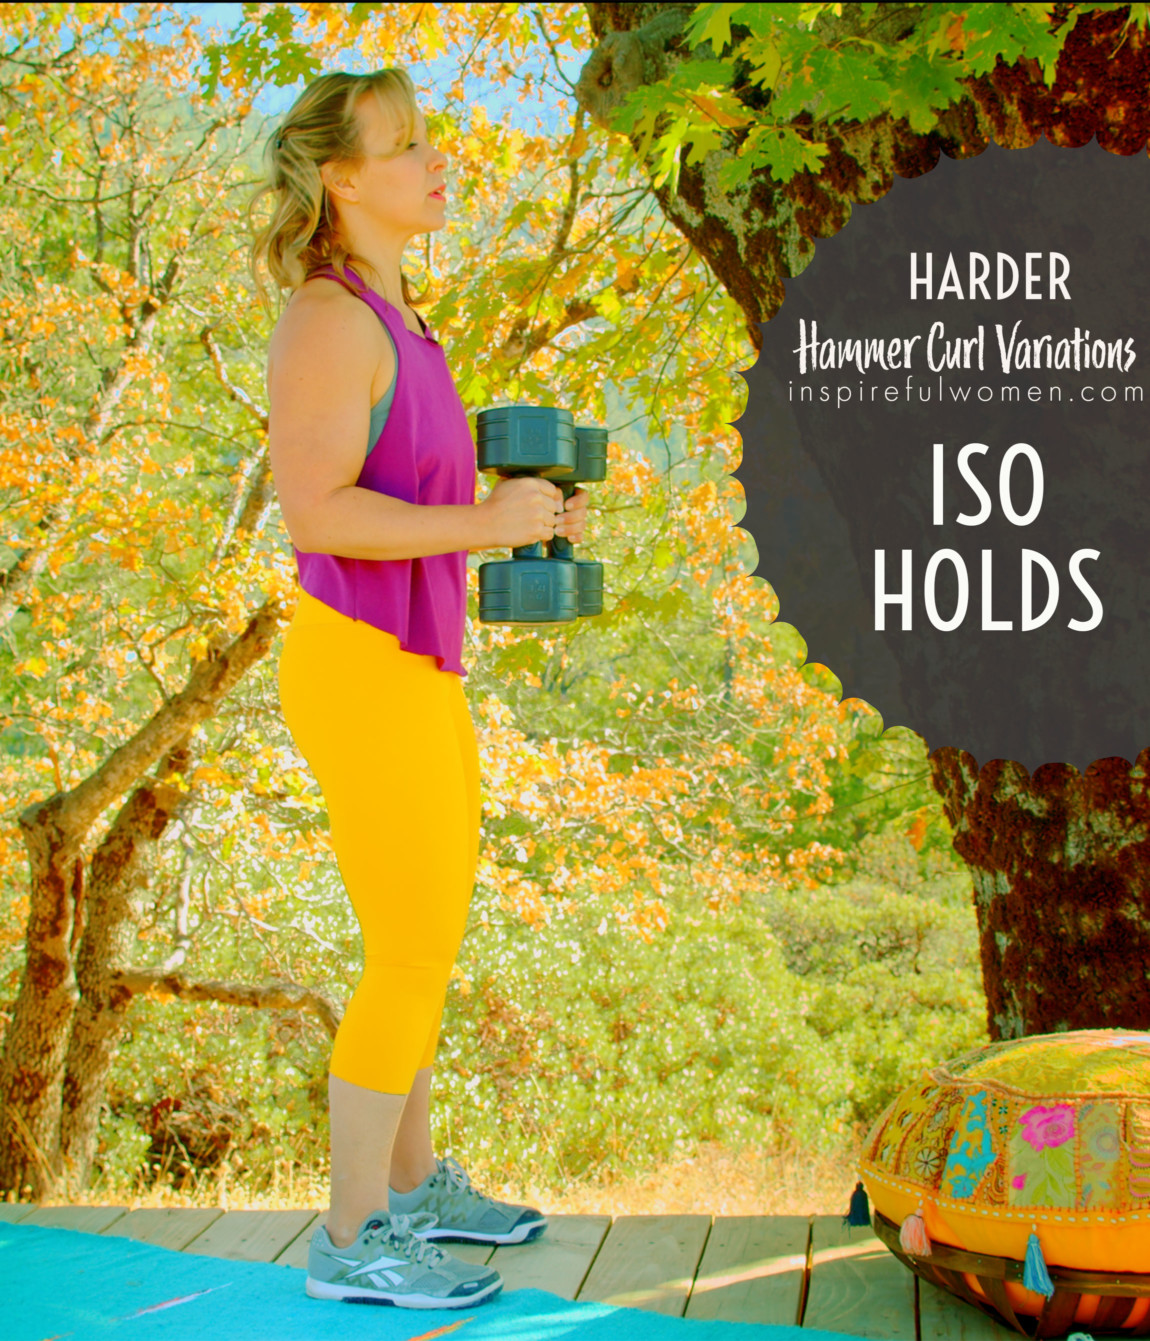 isometric-hold-hammer-curl-bicep-exercise-variation-harder